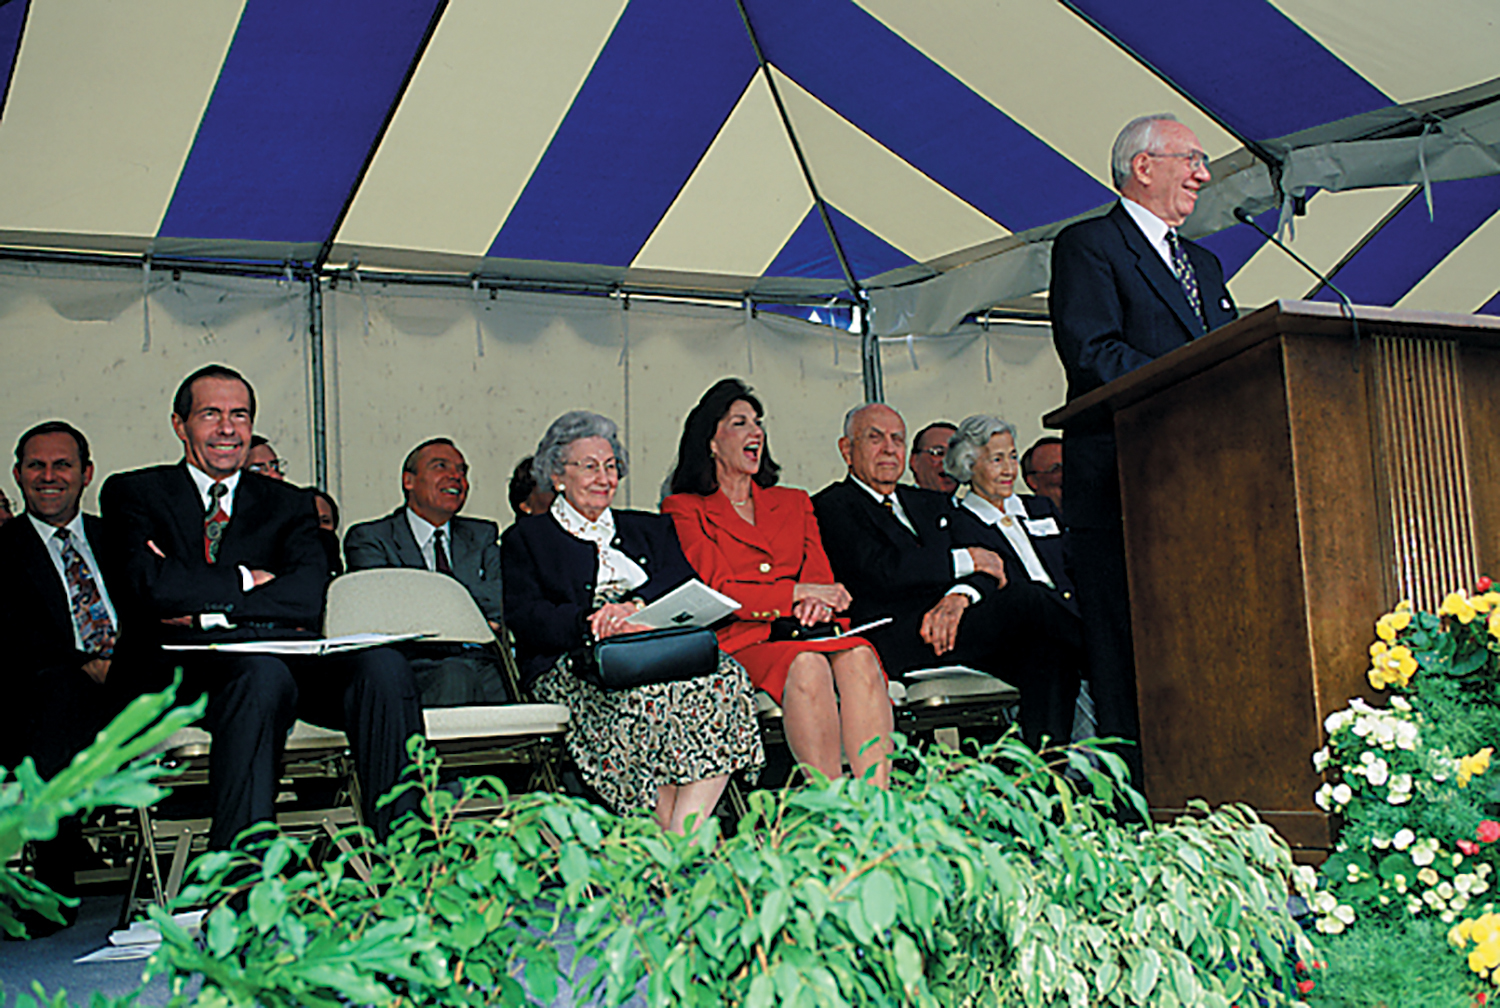 President Gordon B. Hinckley speaking at a podium with board members sitting behind him.